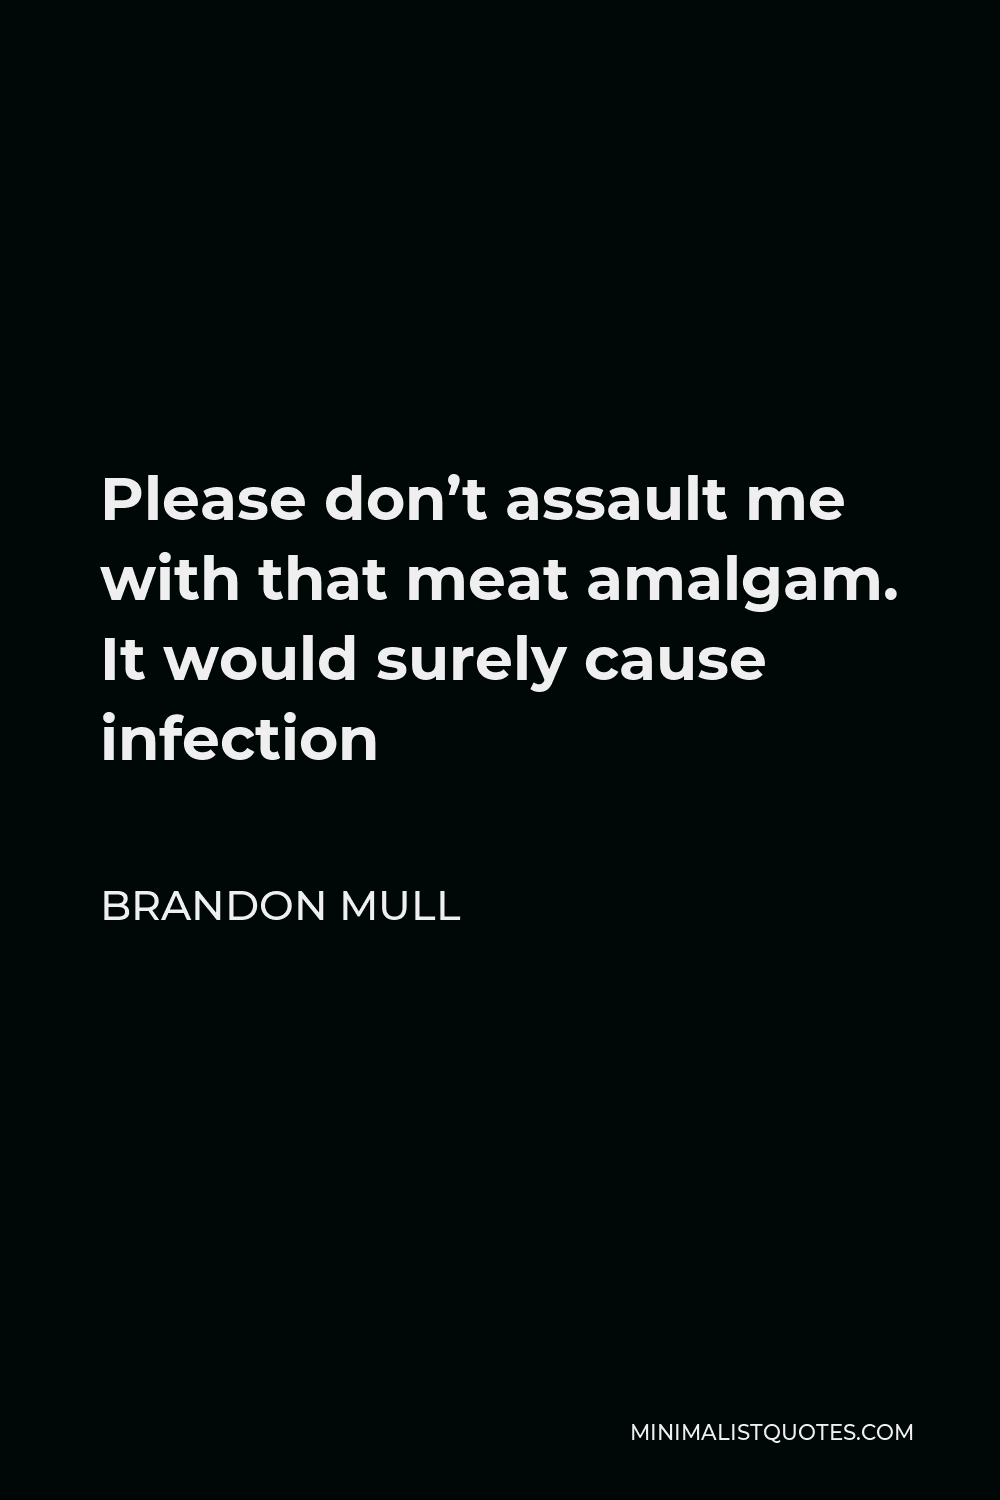 Brandon Mull Quote - Please don’t assault me with that meat amalgam. It would surely cause infection